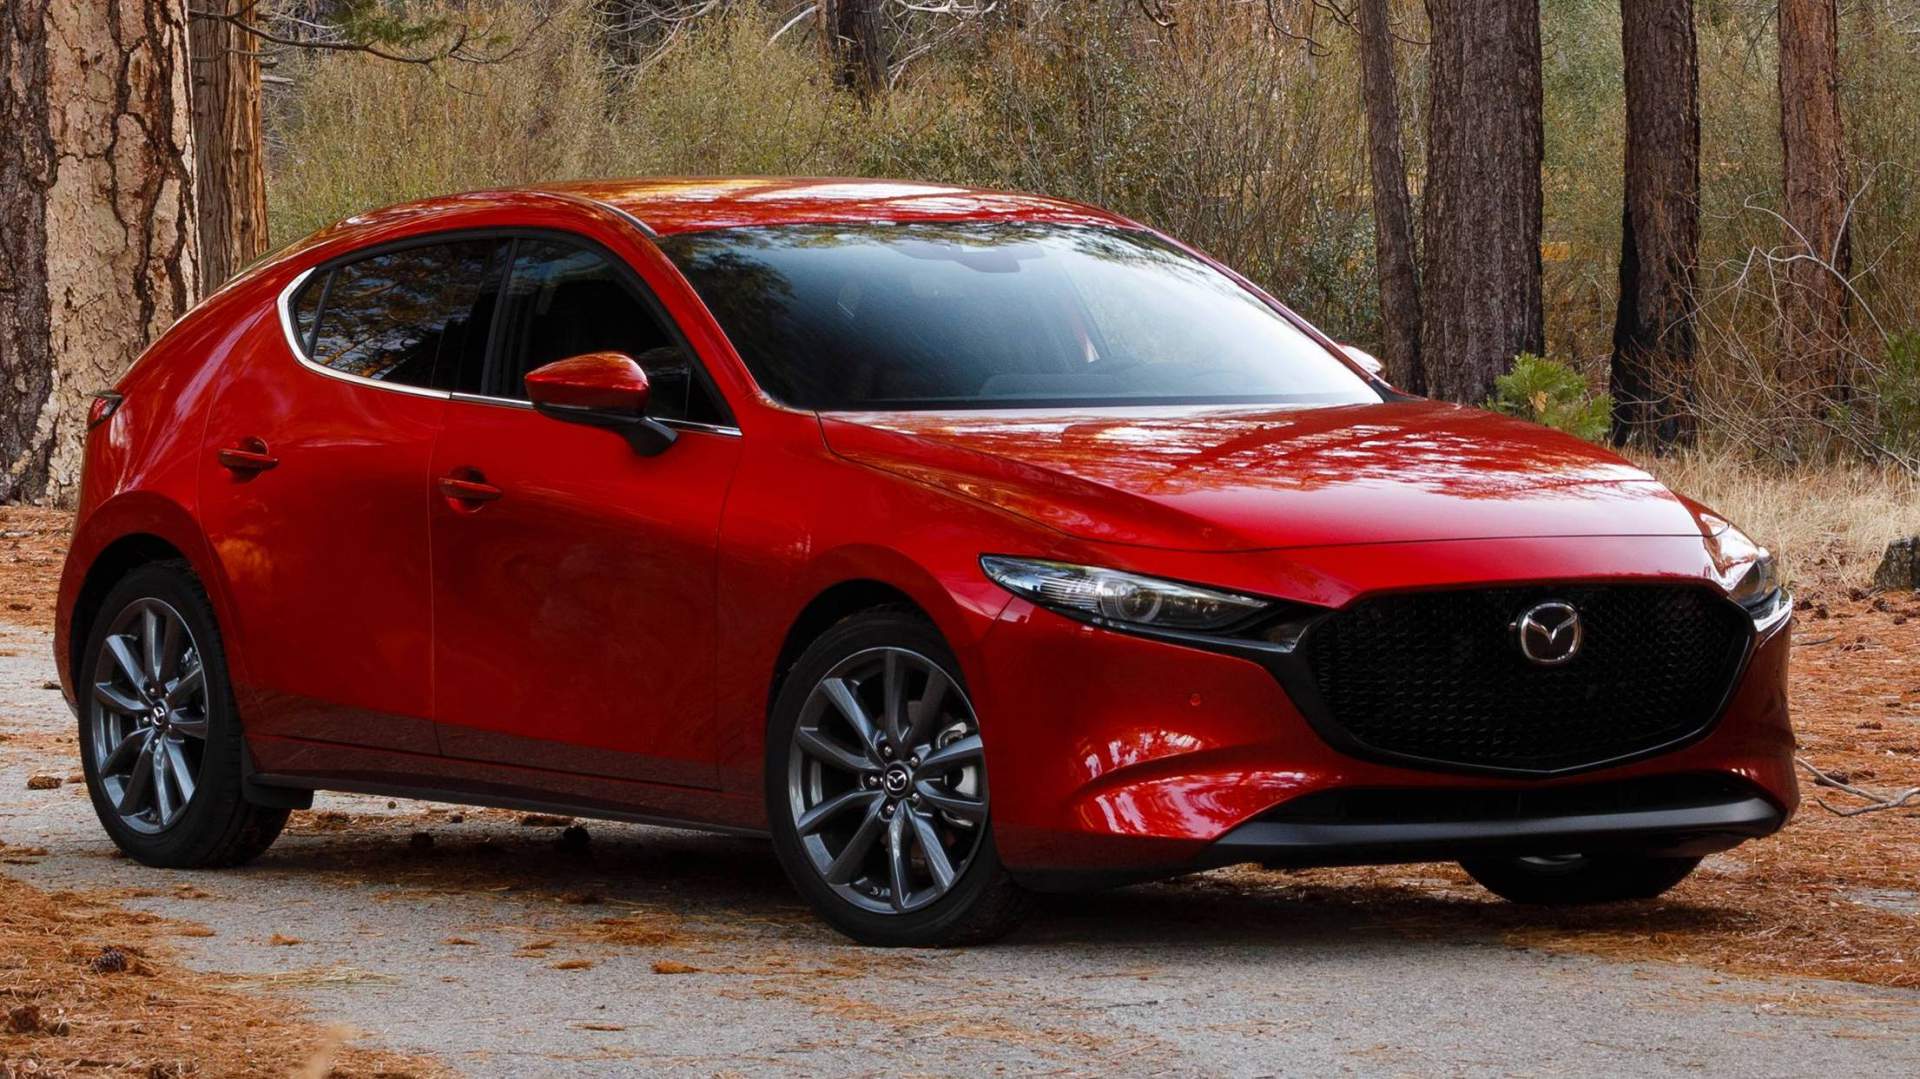 2019 Mazdaspeed3 (Mazda3 MPS) Looks So Good In This Render It Hurts ...